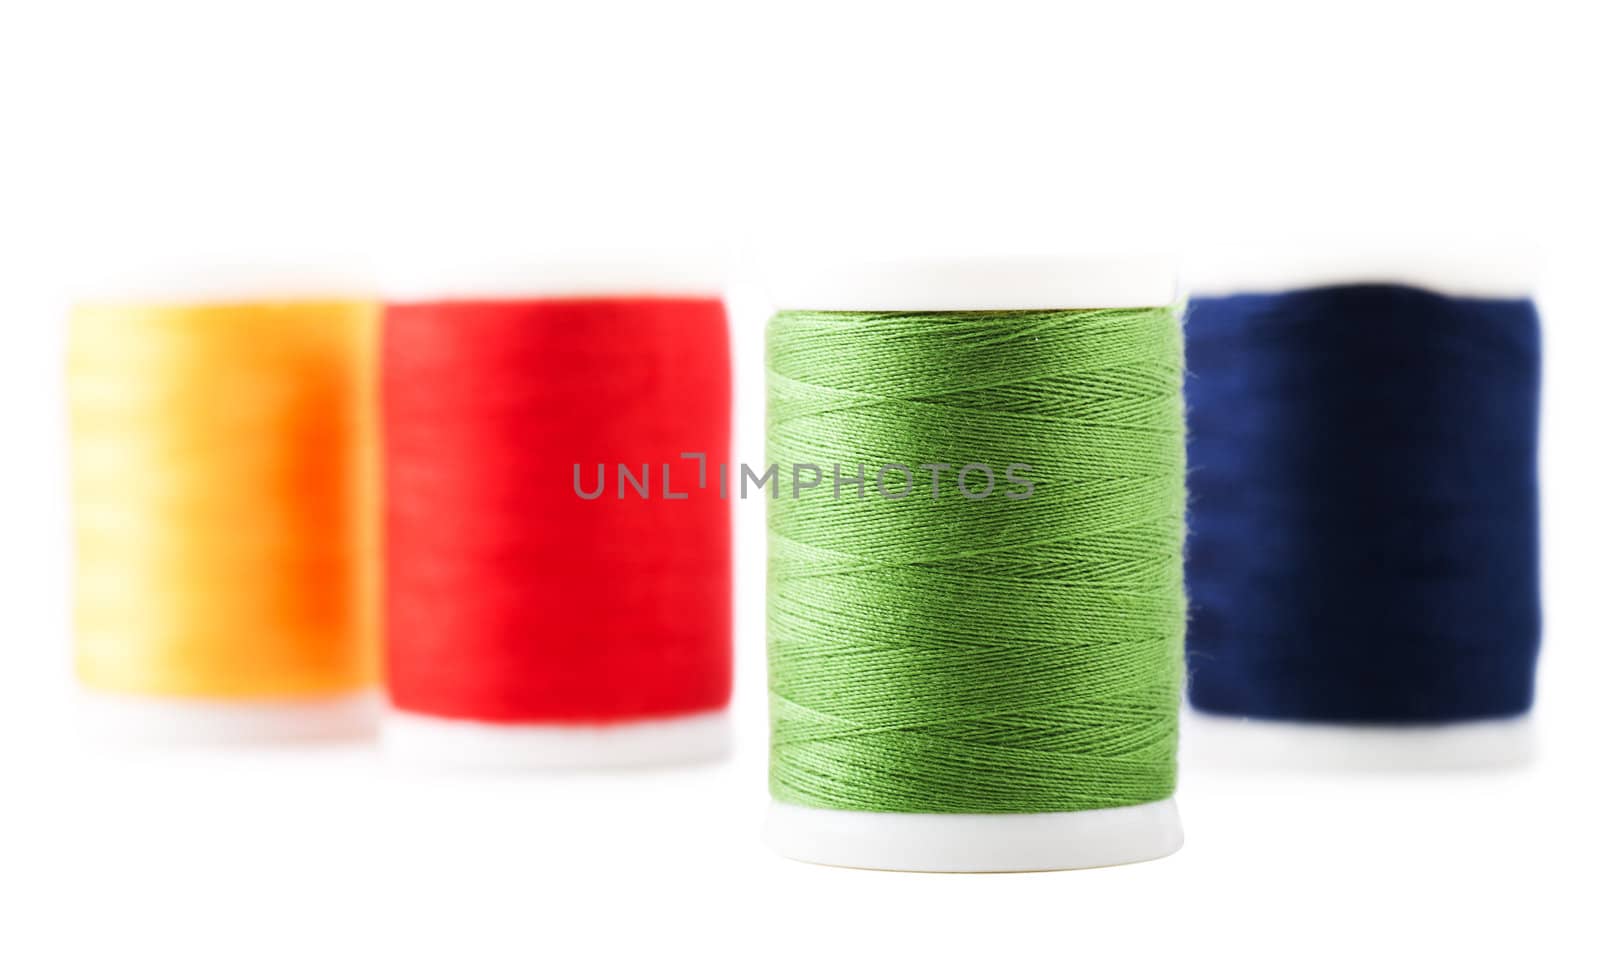 Four spools with green, yellow, blue and red thread